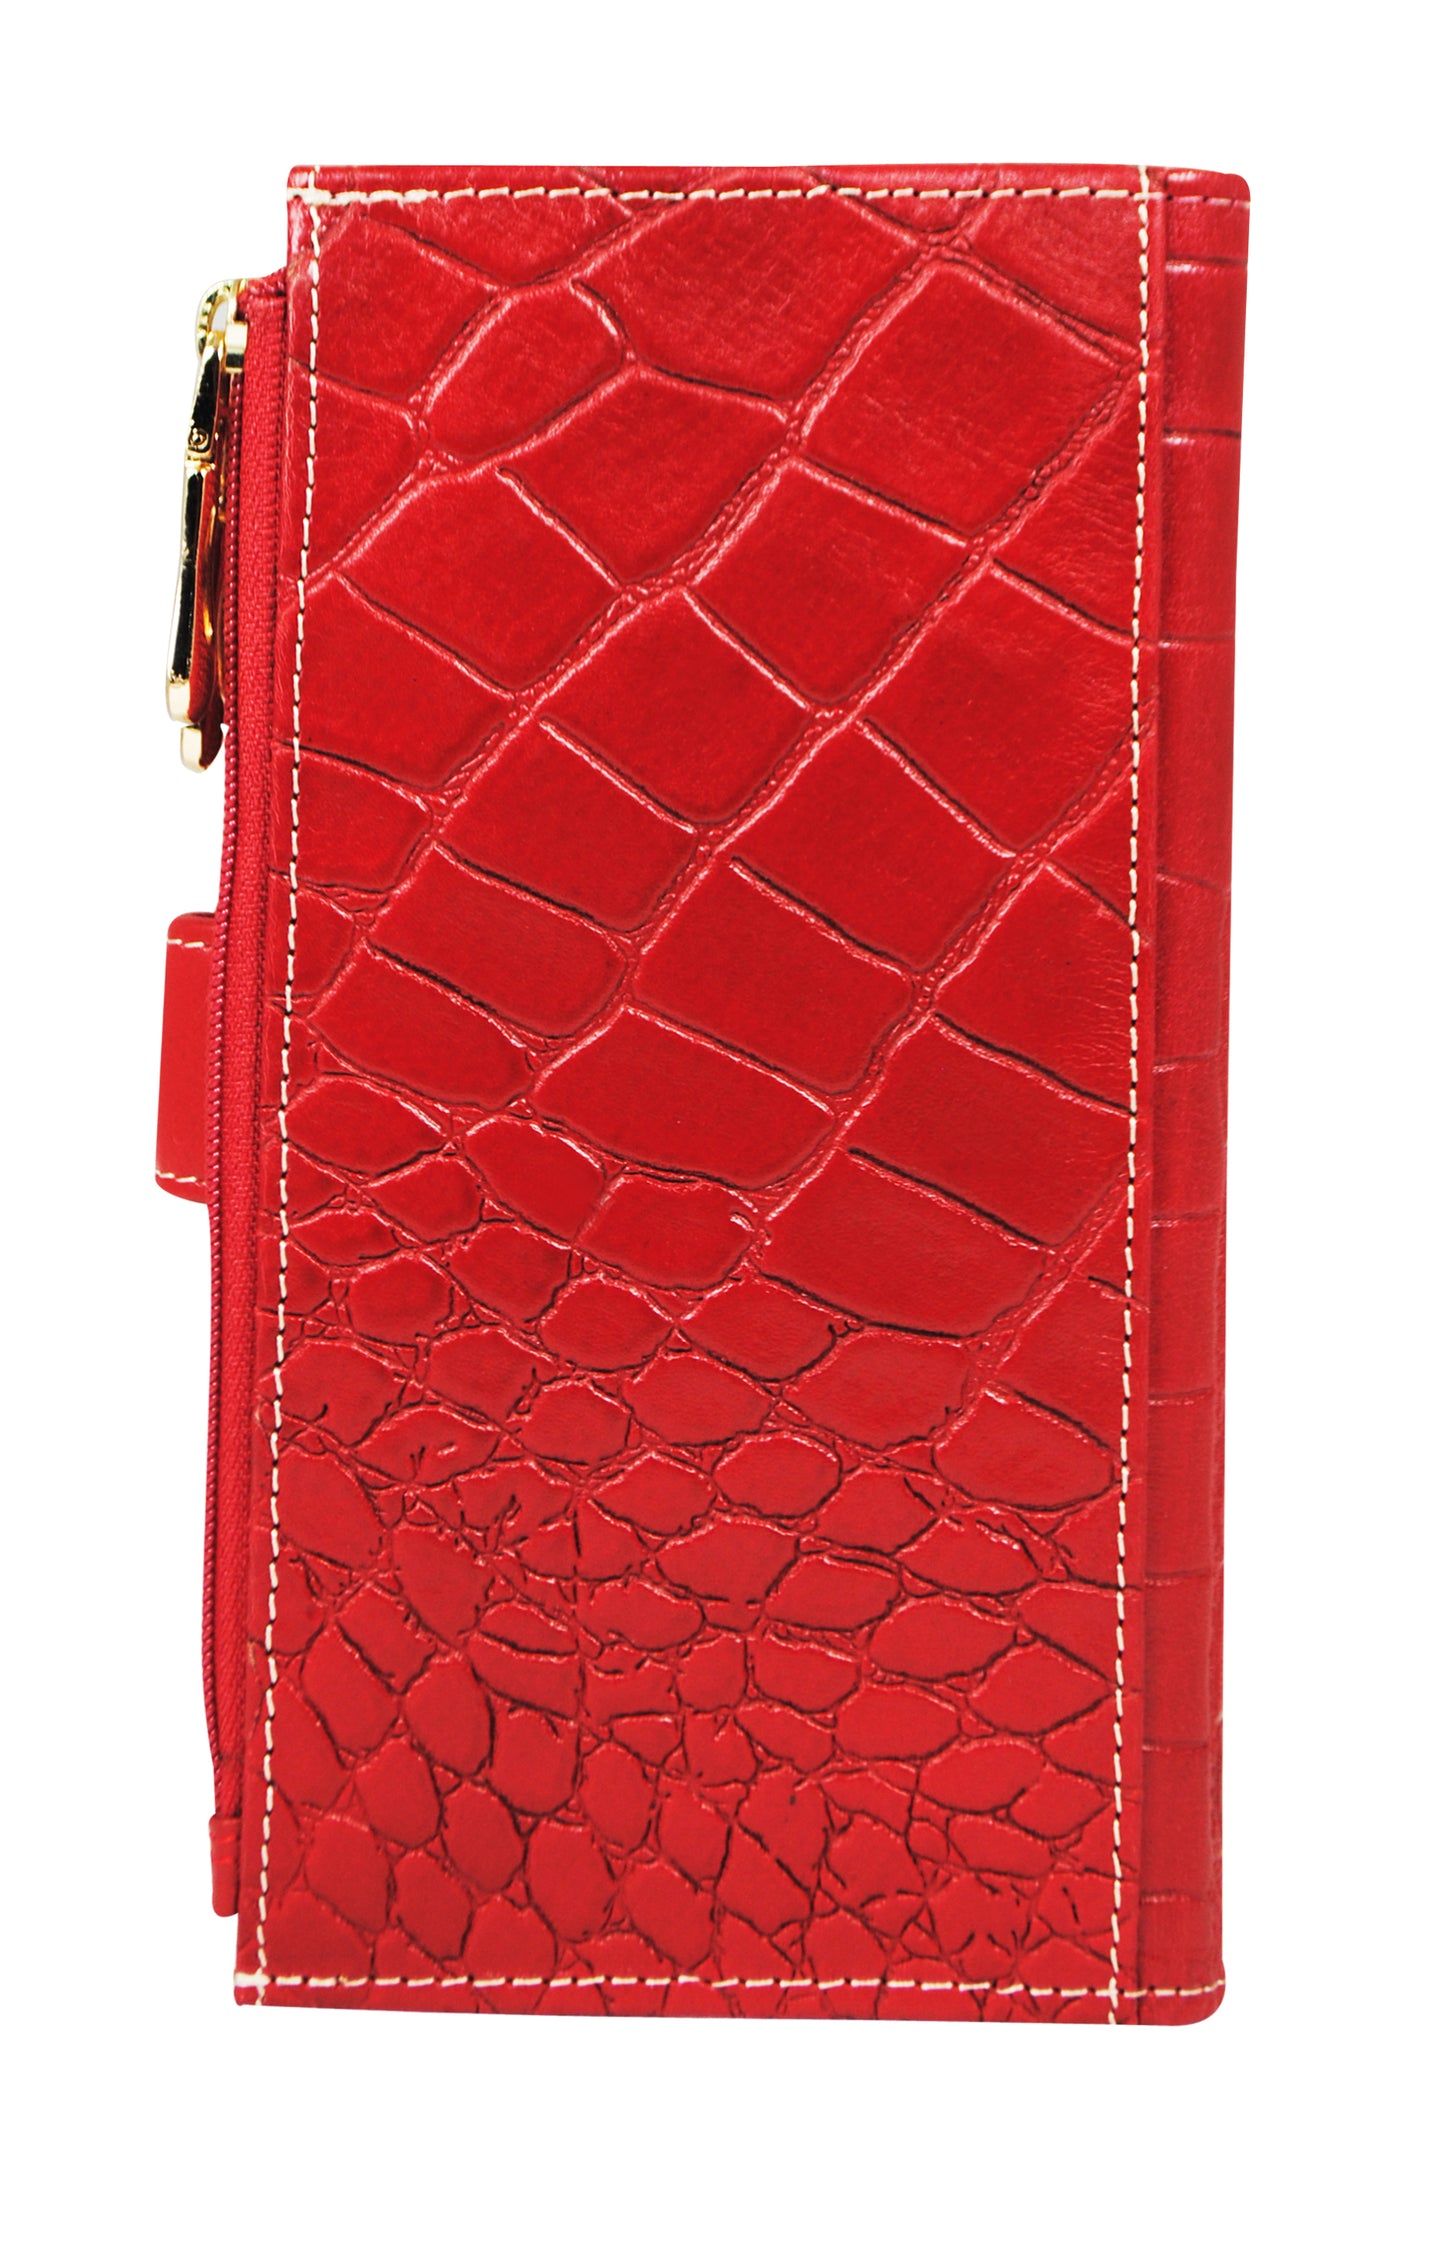 Calfnero Genuine Leather Women's wallet (1011-Red-Coco)